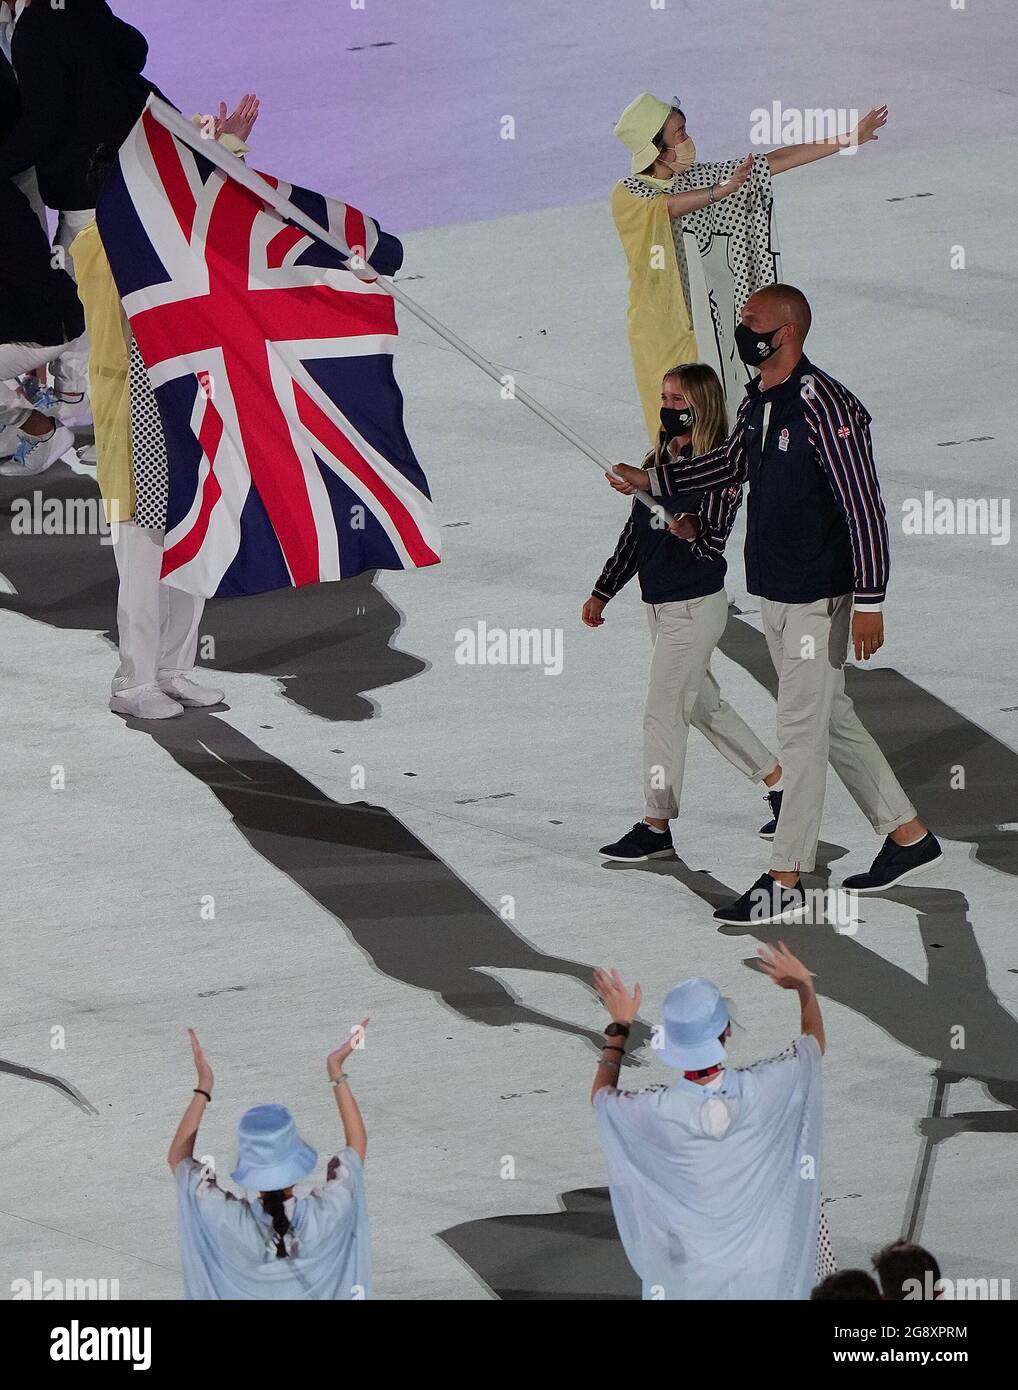 Tokyo, Japan. 23rd July, 2021. Flag bearers of the Olympic delegation of Great Britain parade into the Olympic Stadium during the opening ceremony of Tokyo 2020 Olympic Games in Tokyo, Japan, July 23, 2021. Credit: Lui Siu Wai/Xinhua/Alamy Live News Stock Photo